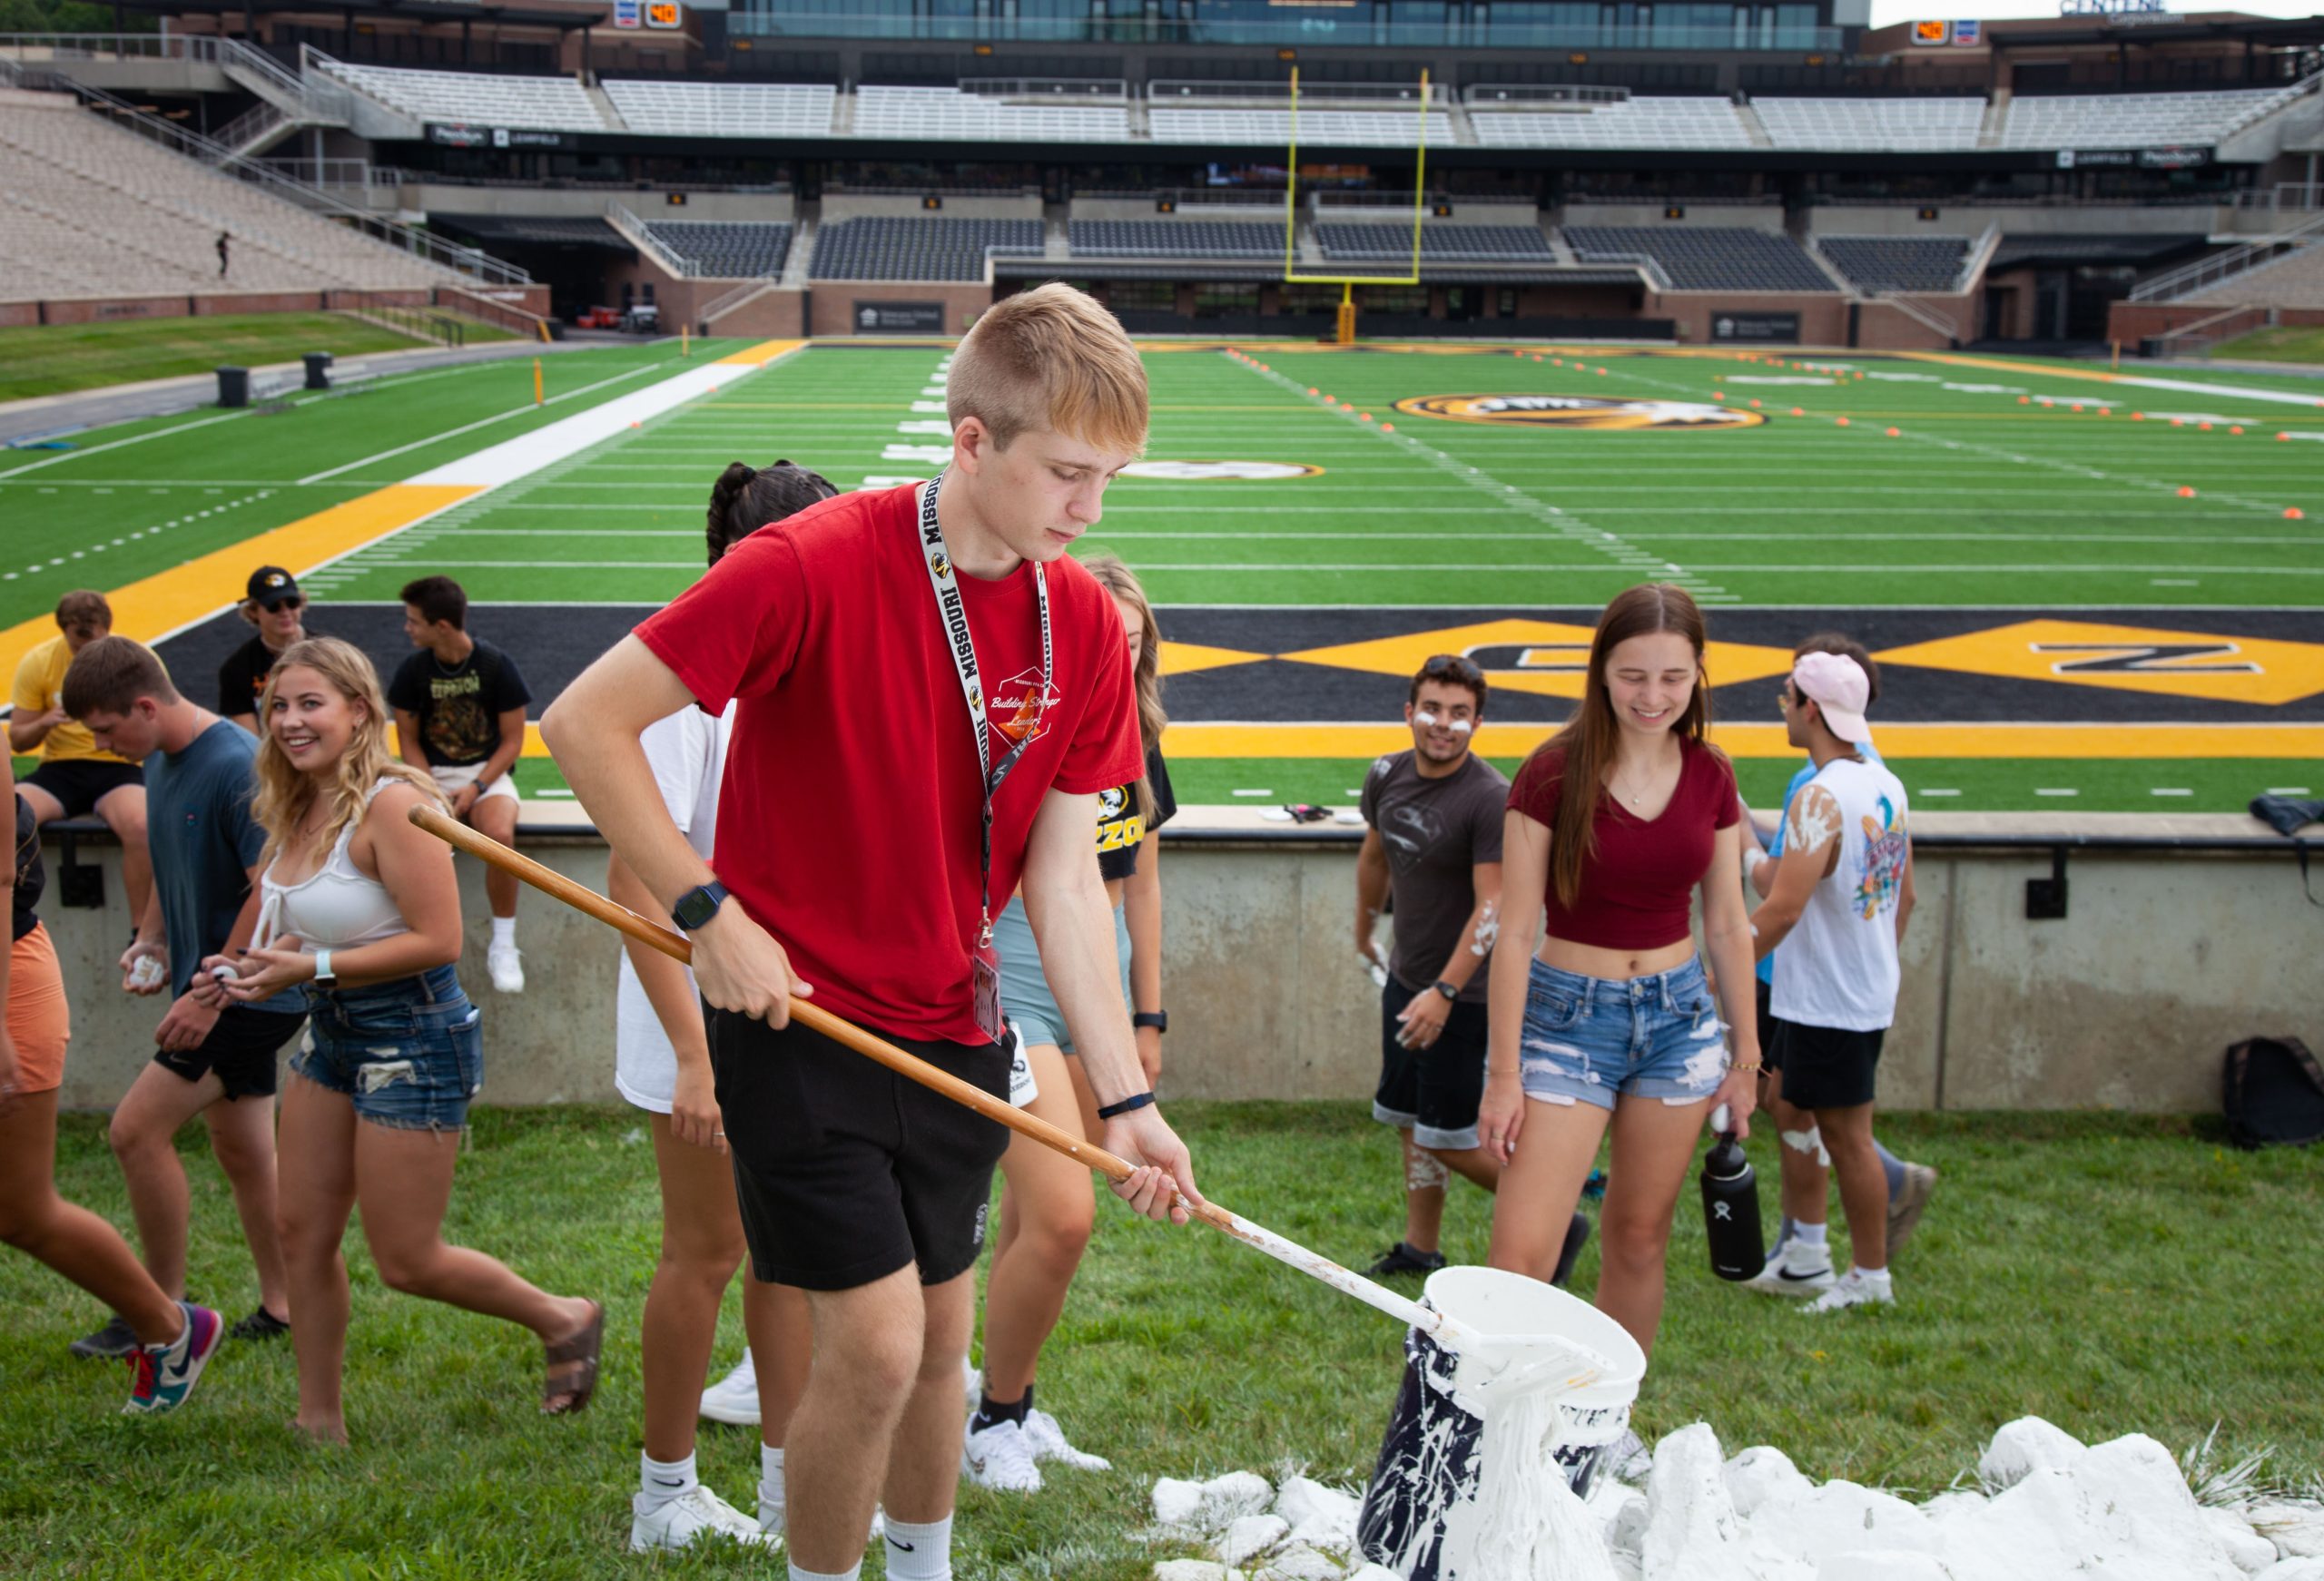 Students participate the painting the rock M at Faurot Field